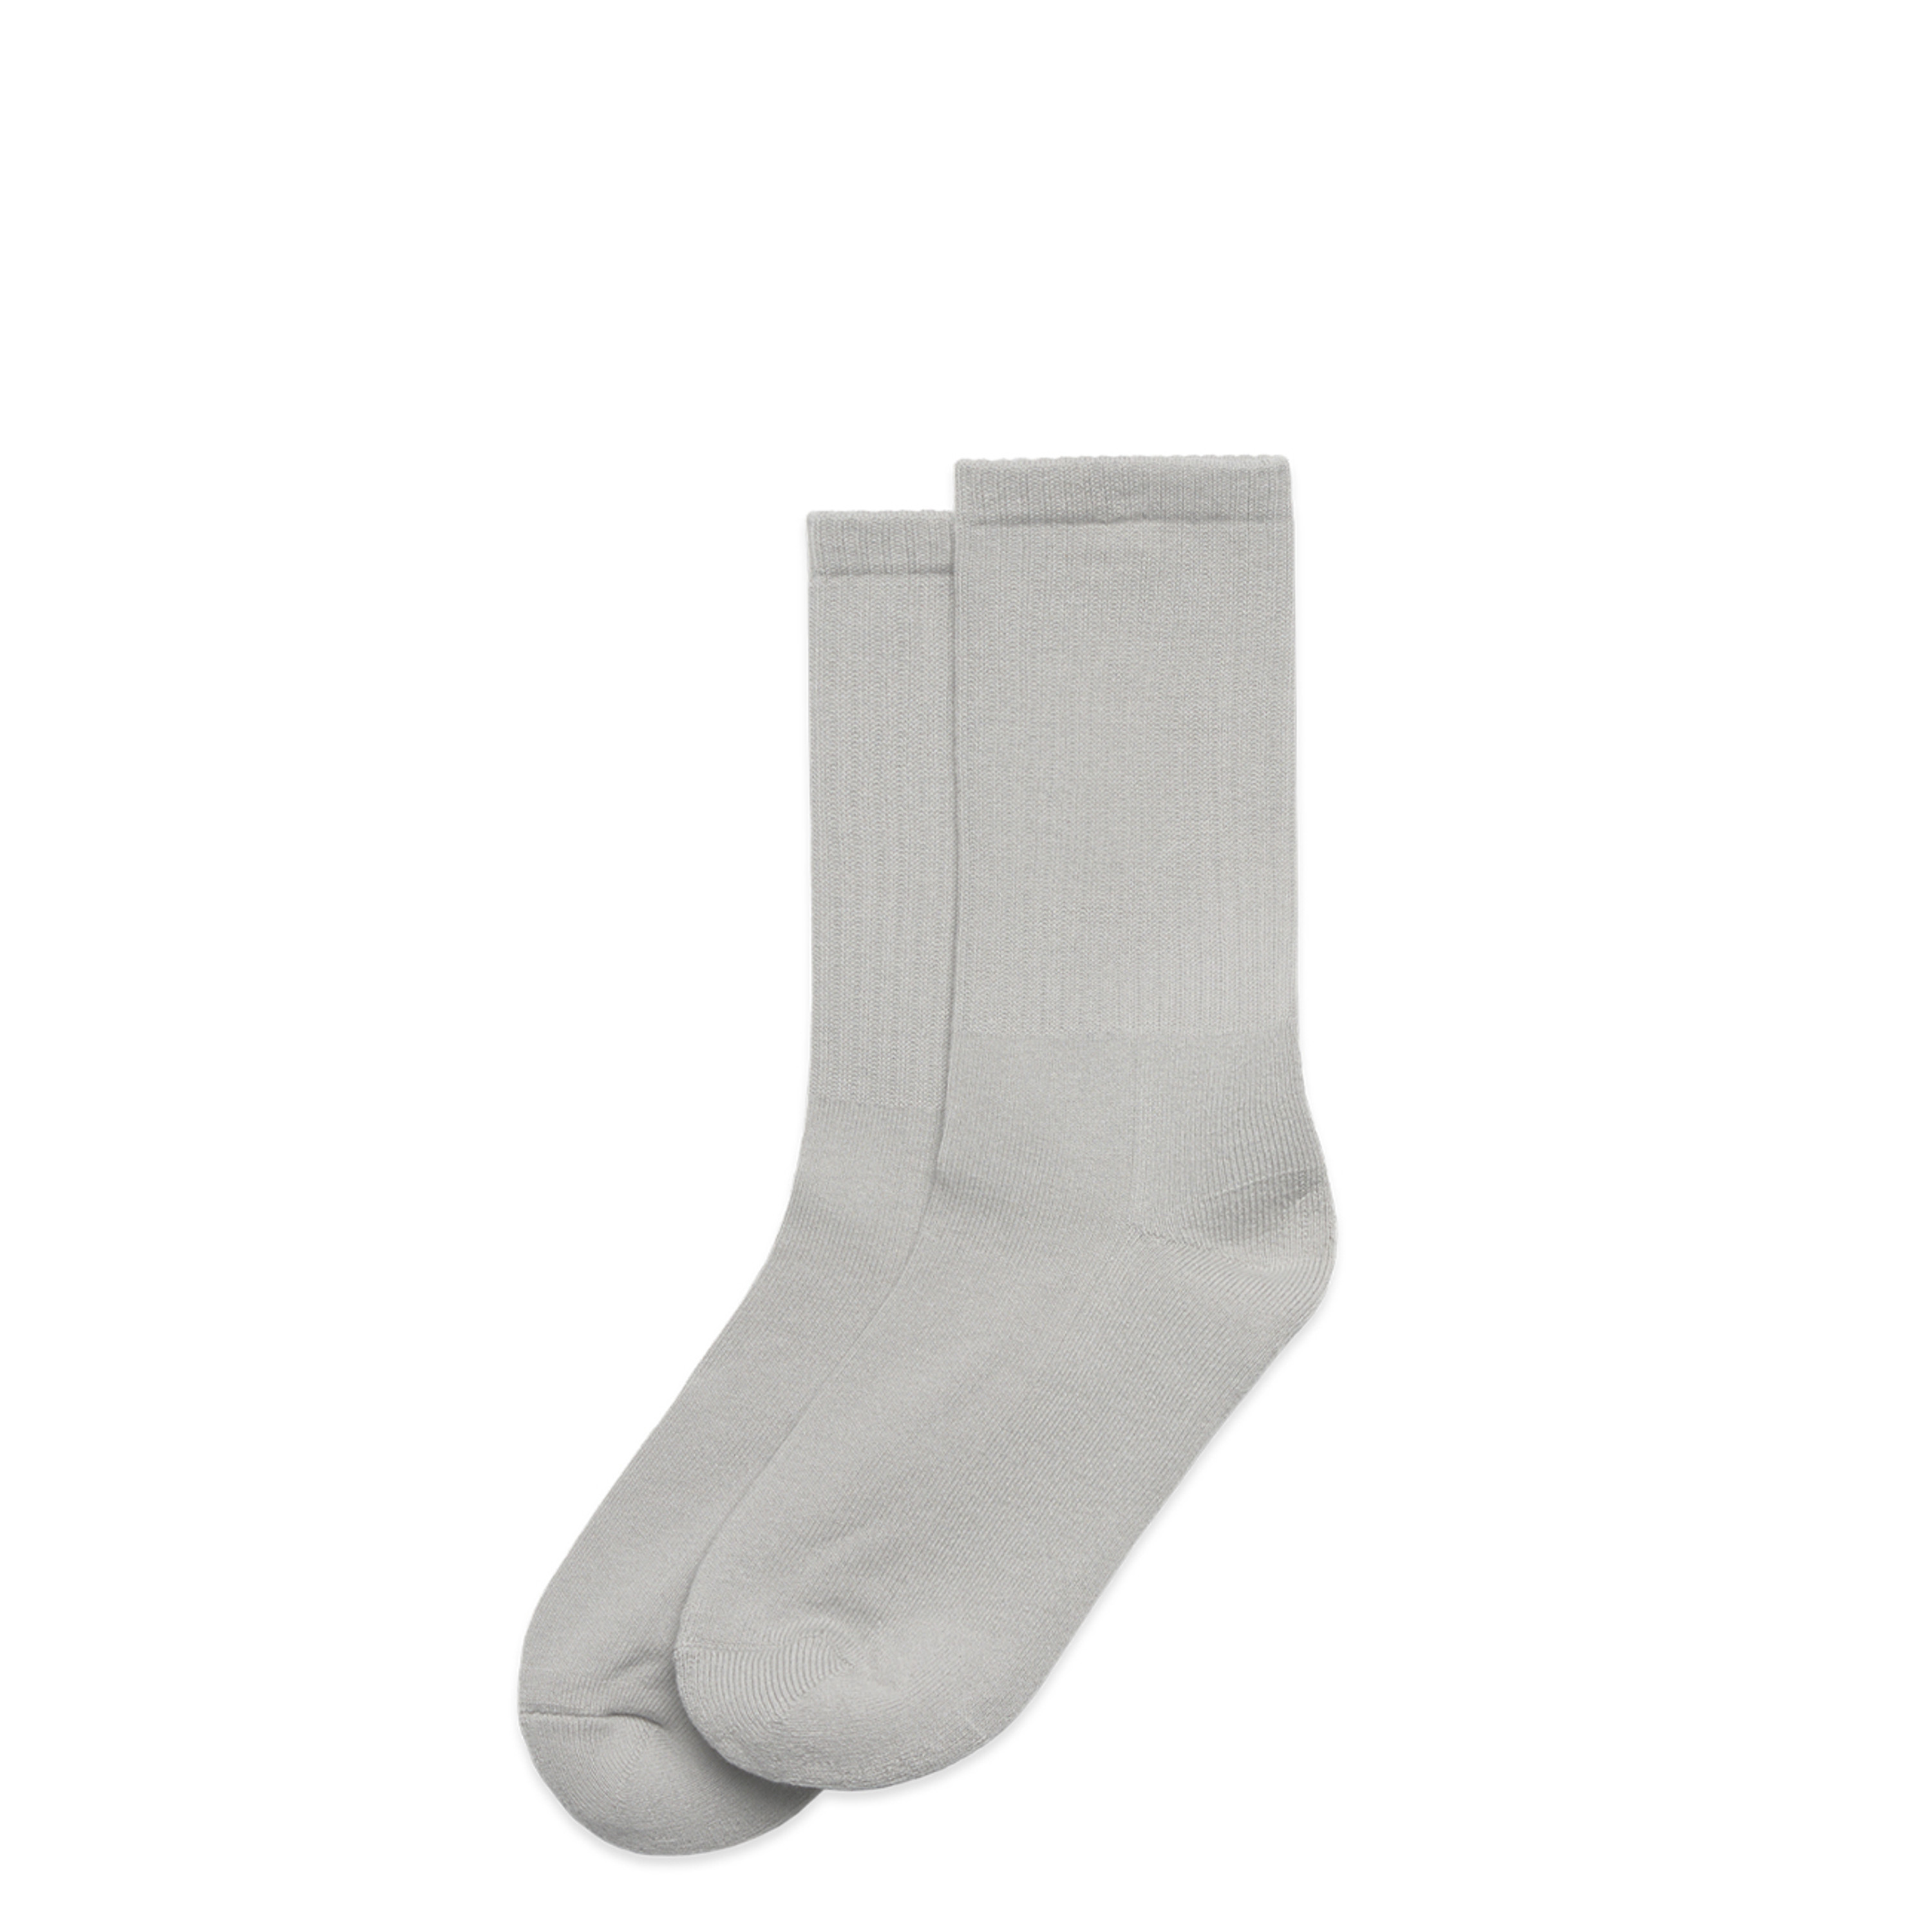 Relax Socks (2 Pairs) - 1208 - AS Colour US